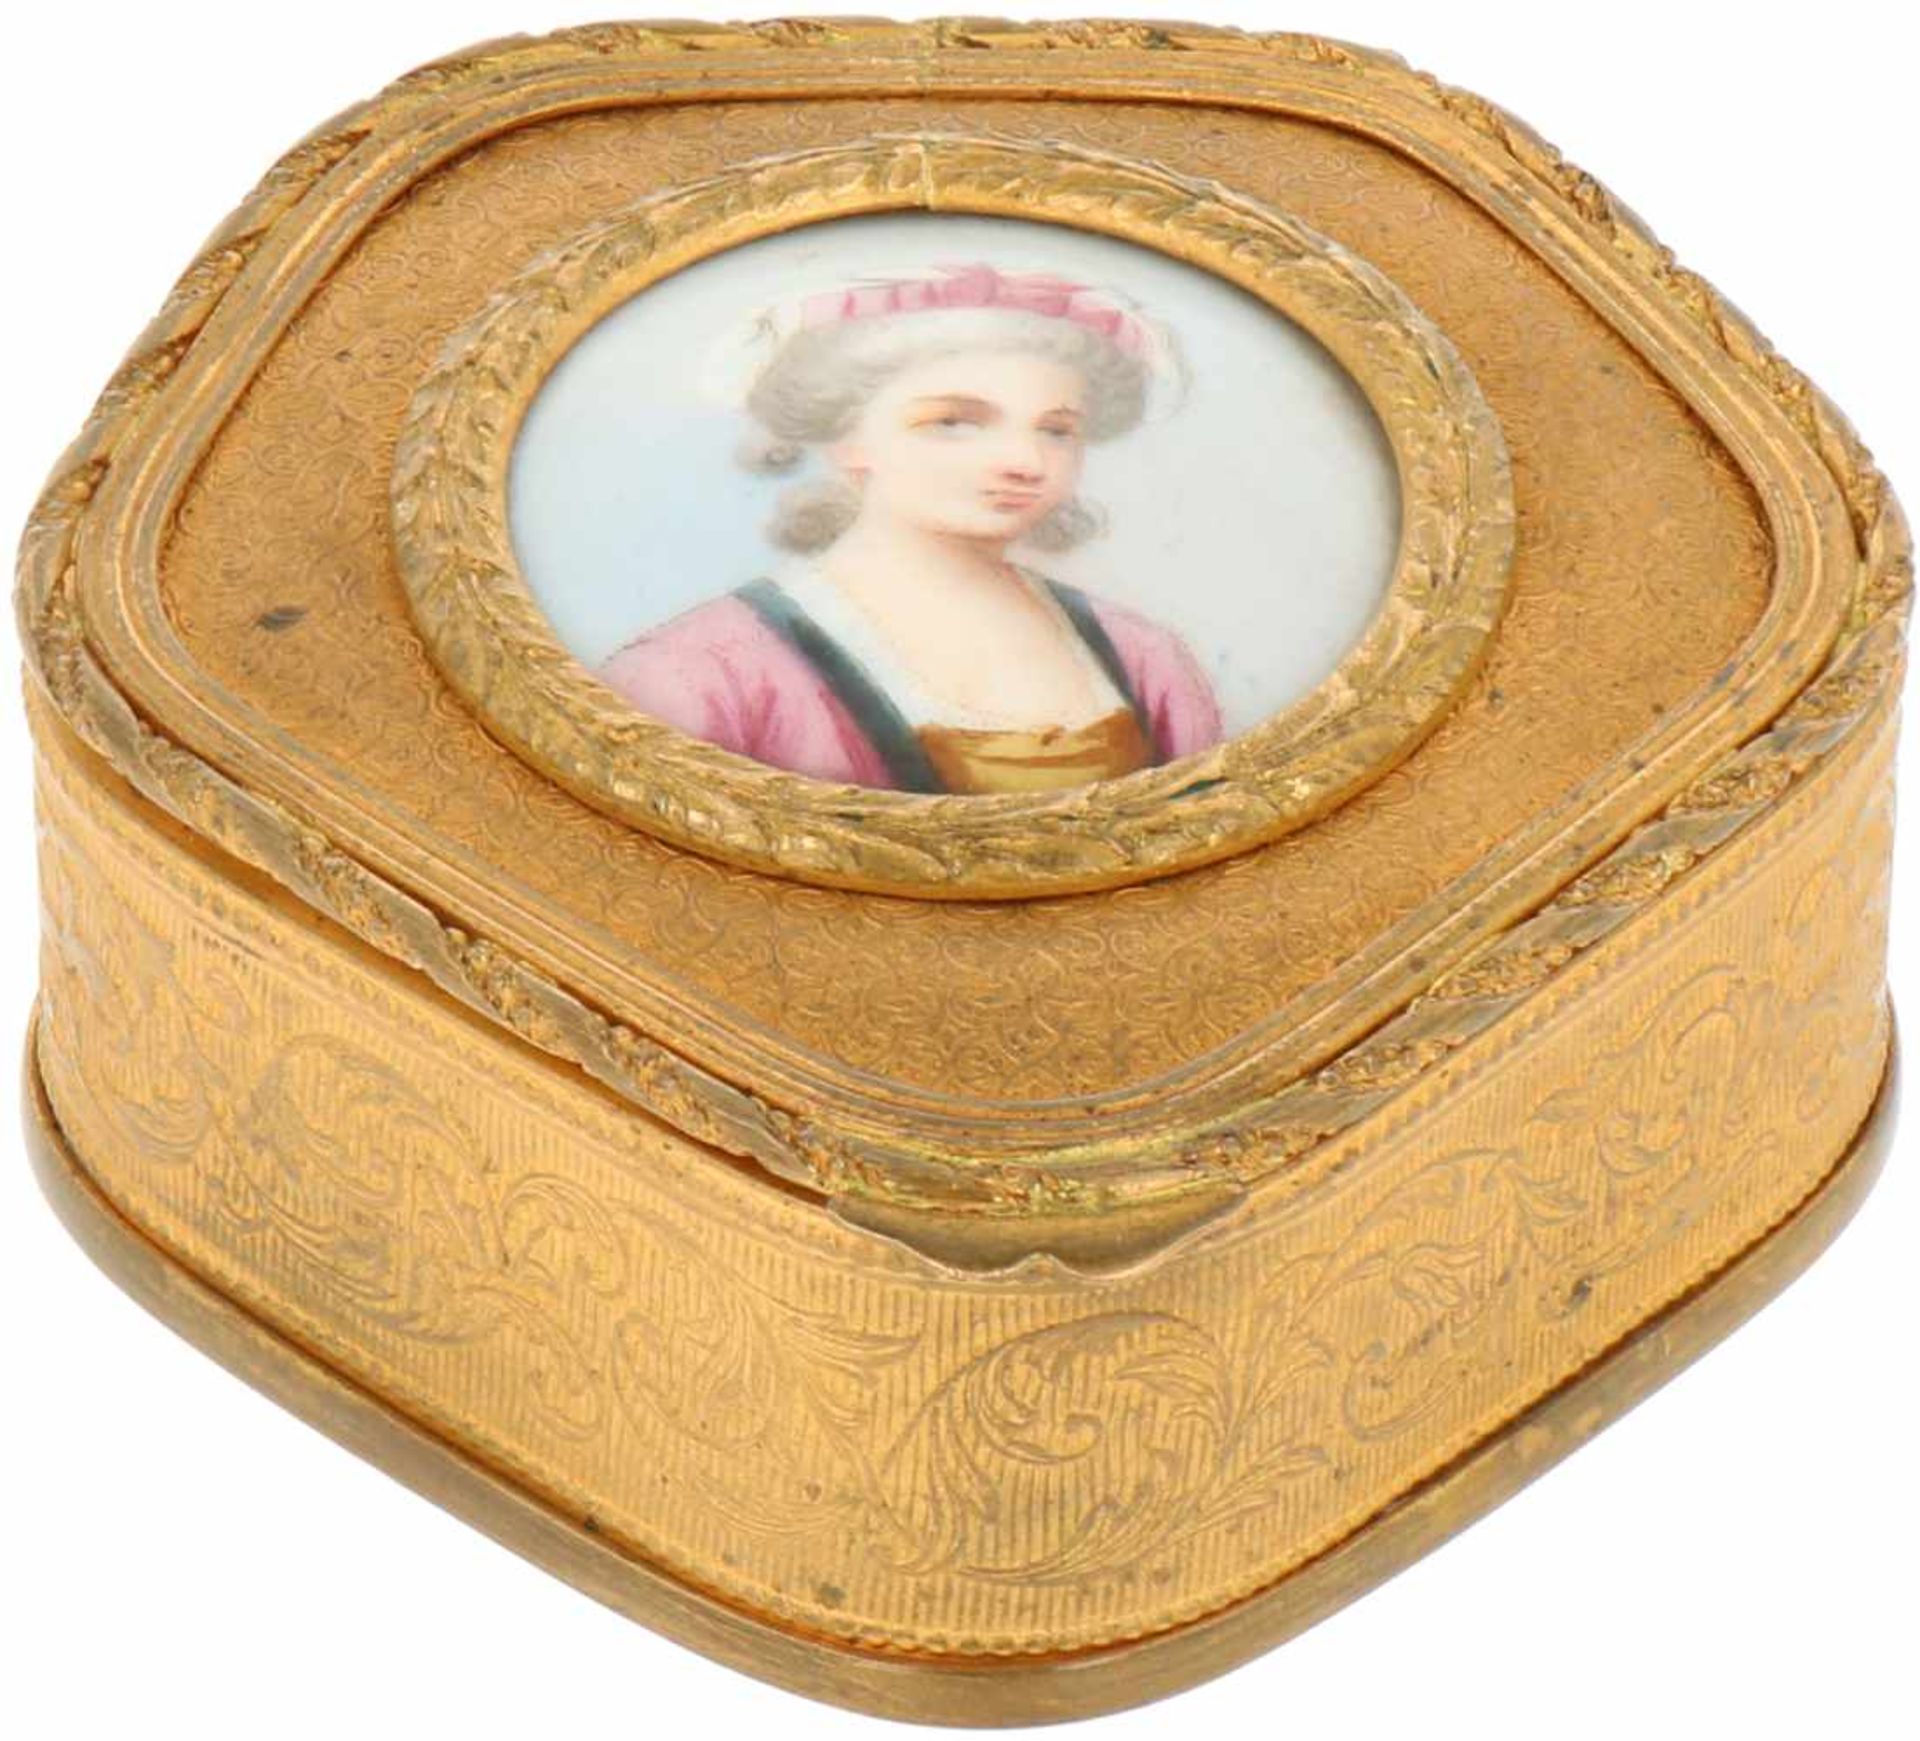 A gilt jewellery case with Limoges portrait. France, ca. 1900.